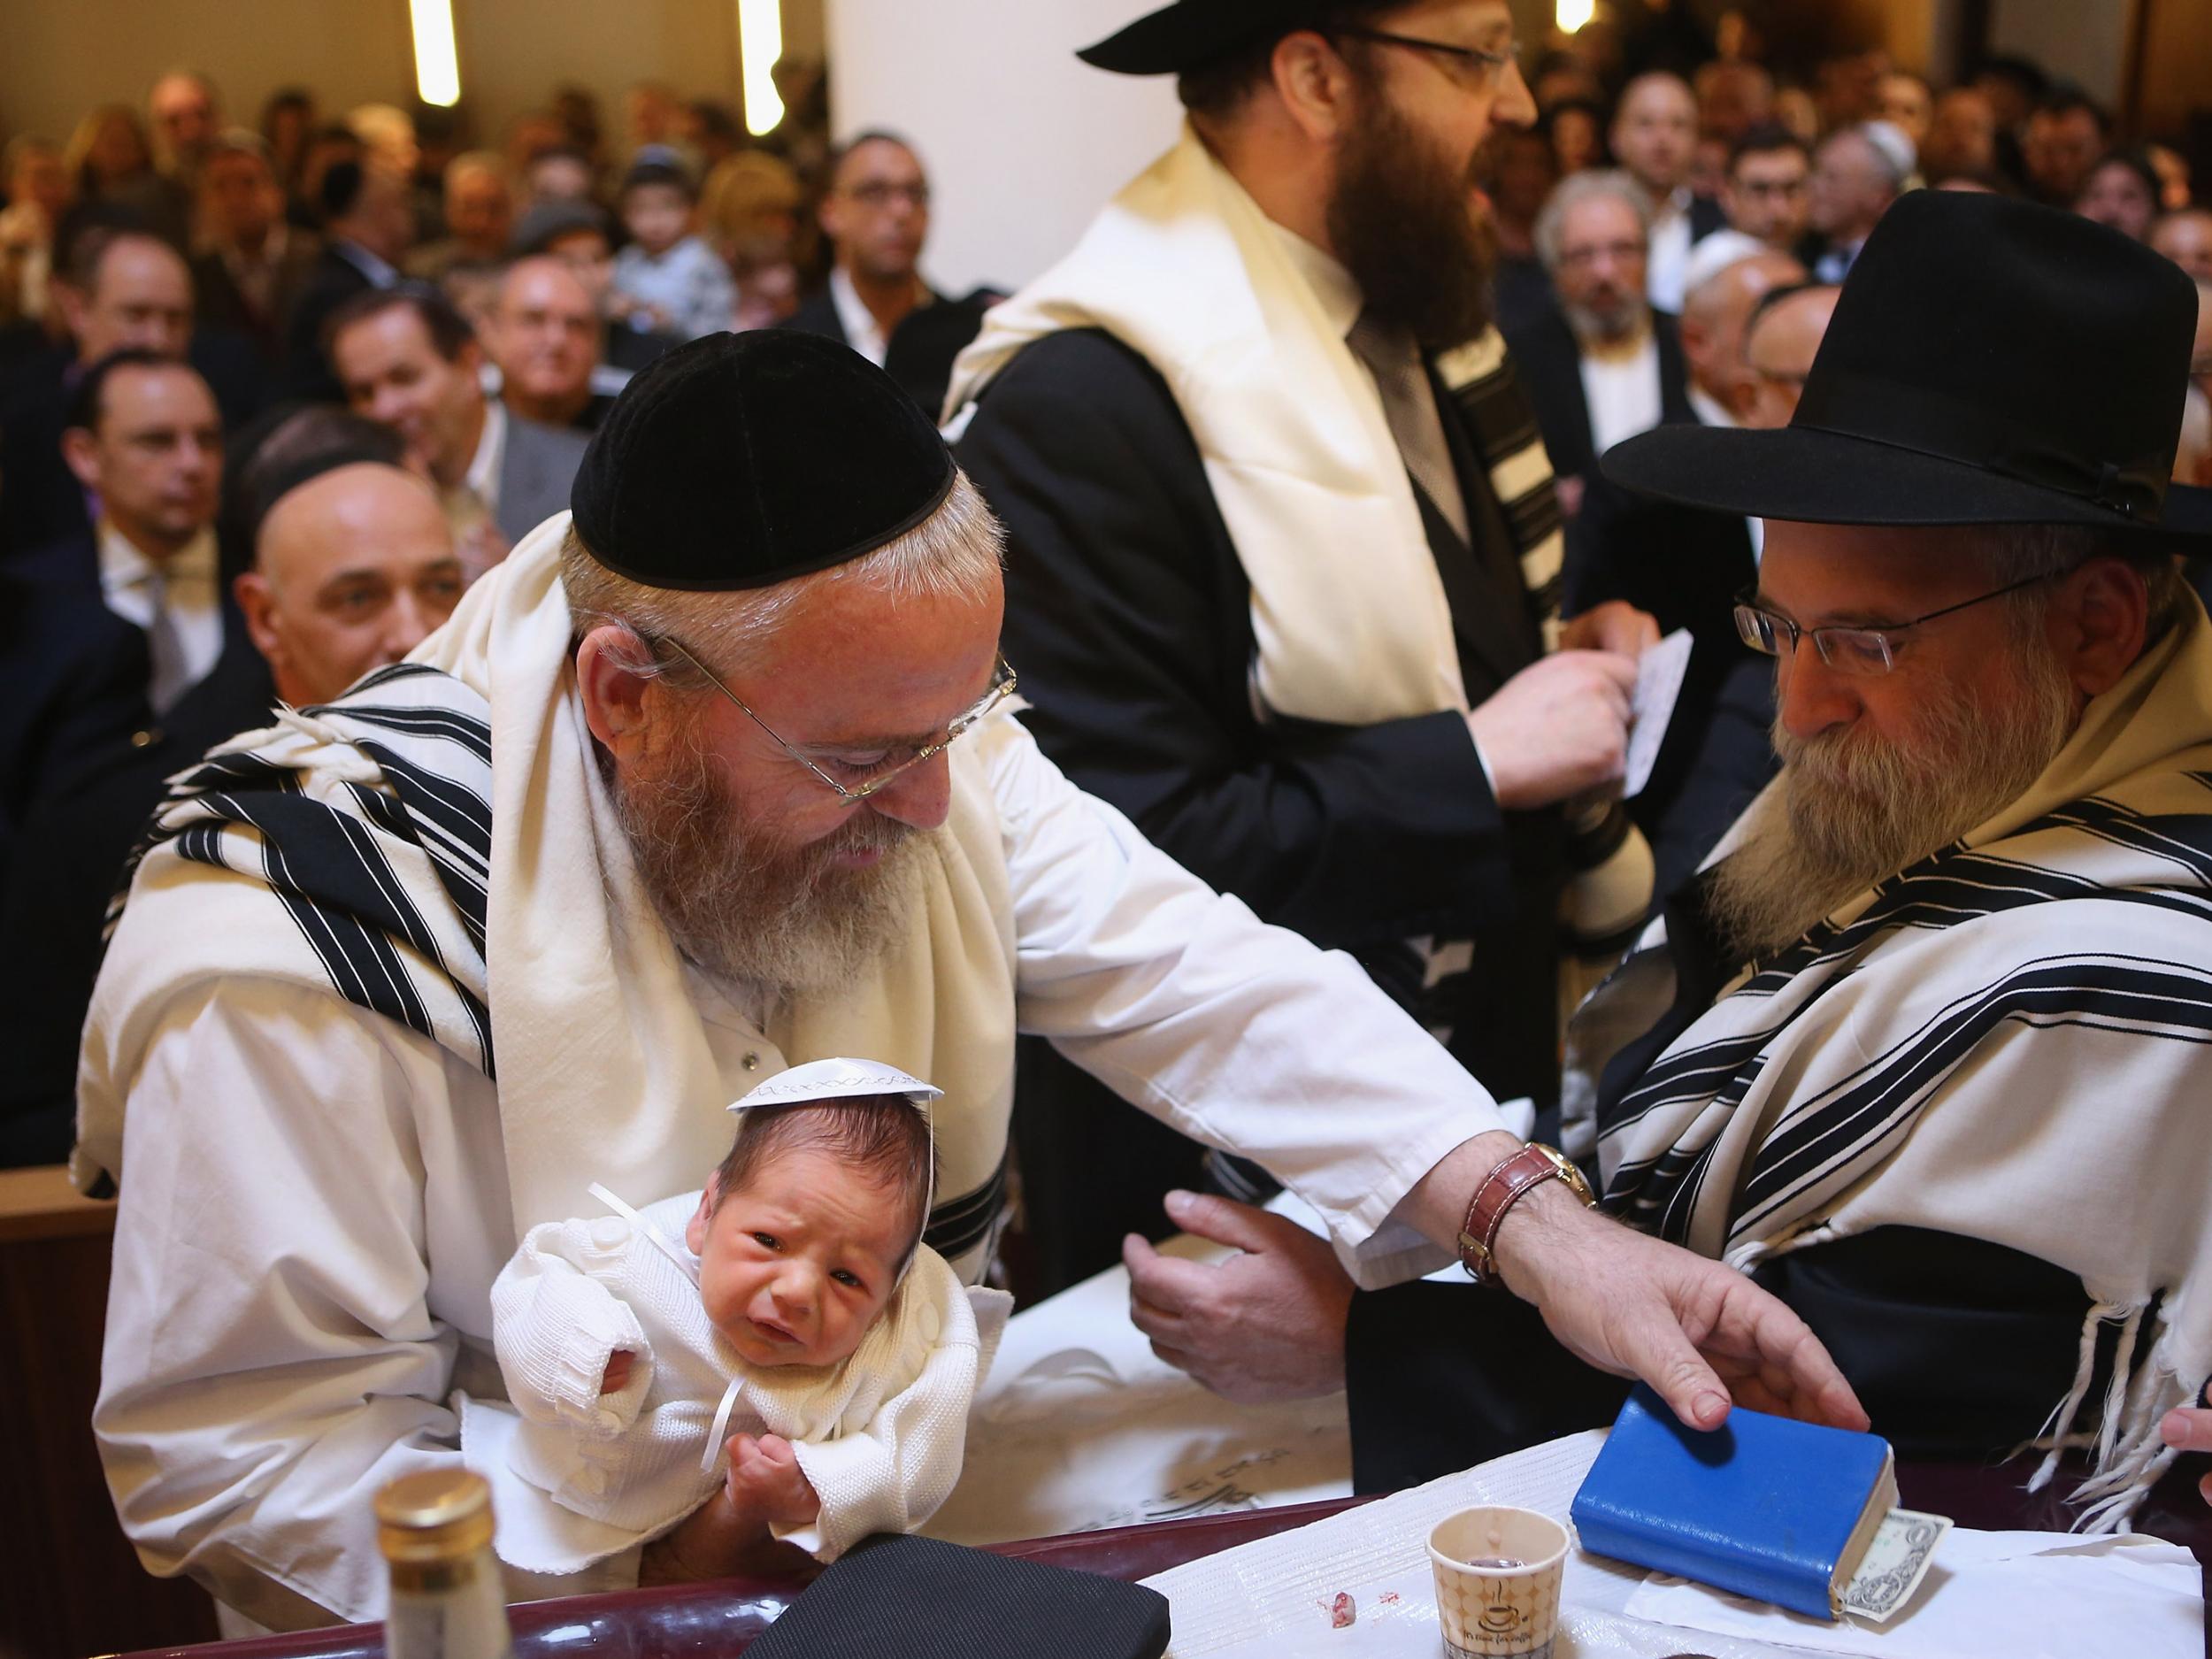 The circumcision ceremony of a baby at an Orthodox Jewish synagogue in Berlin, Germany. In 2013, a Cologne court sparked outrage among the country's Jewish and Muslim population by questioning the legality of the practice